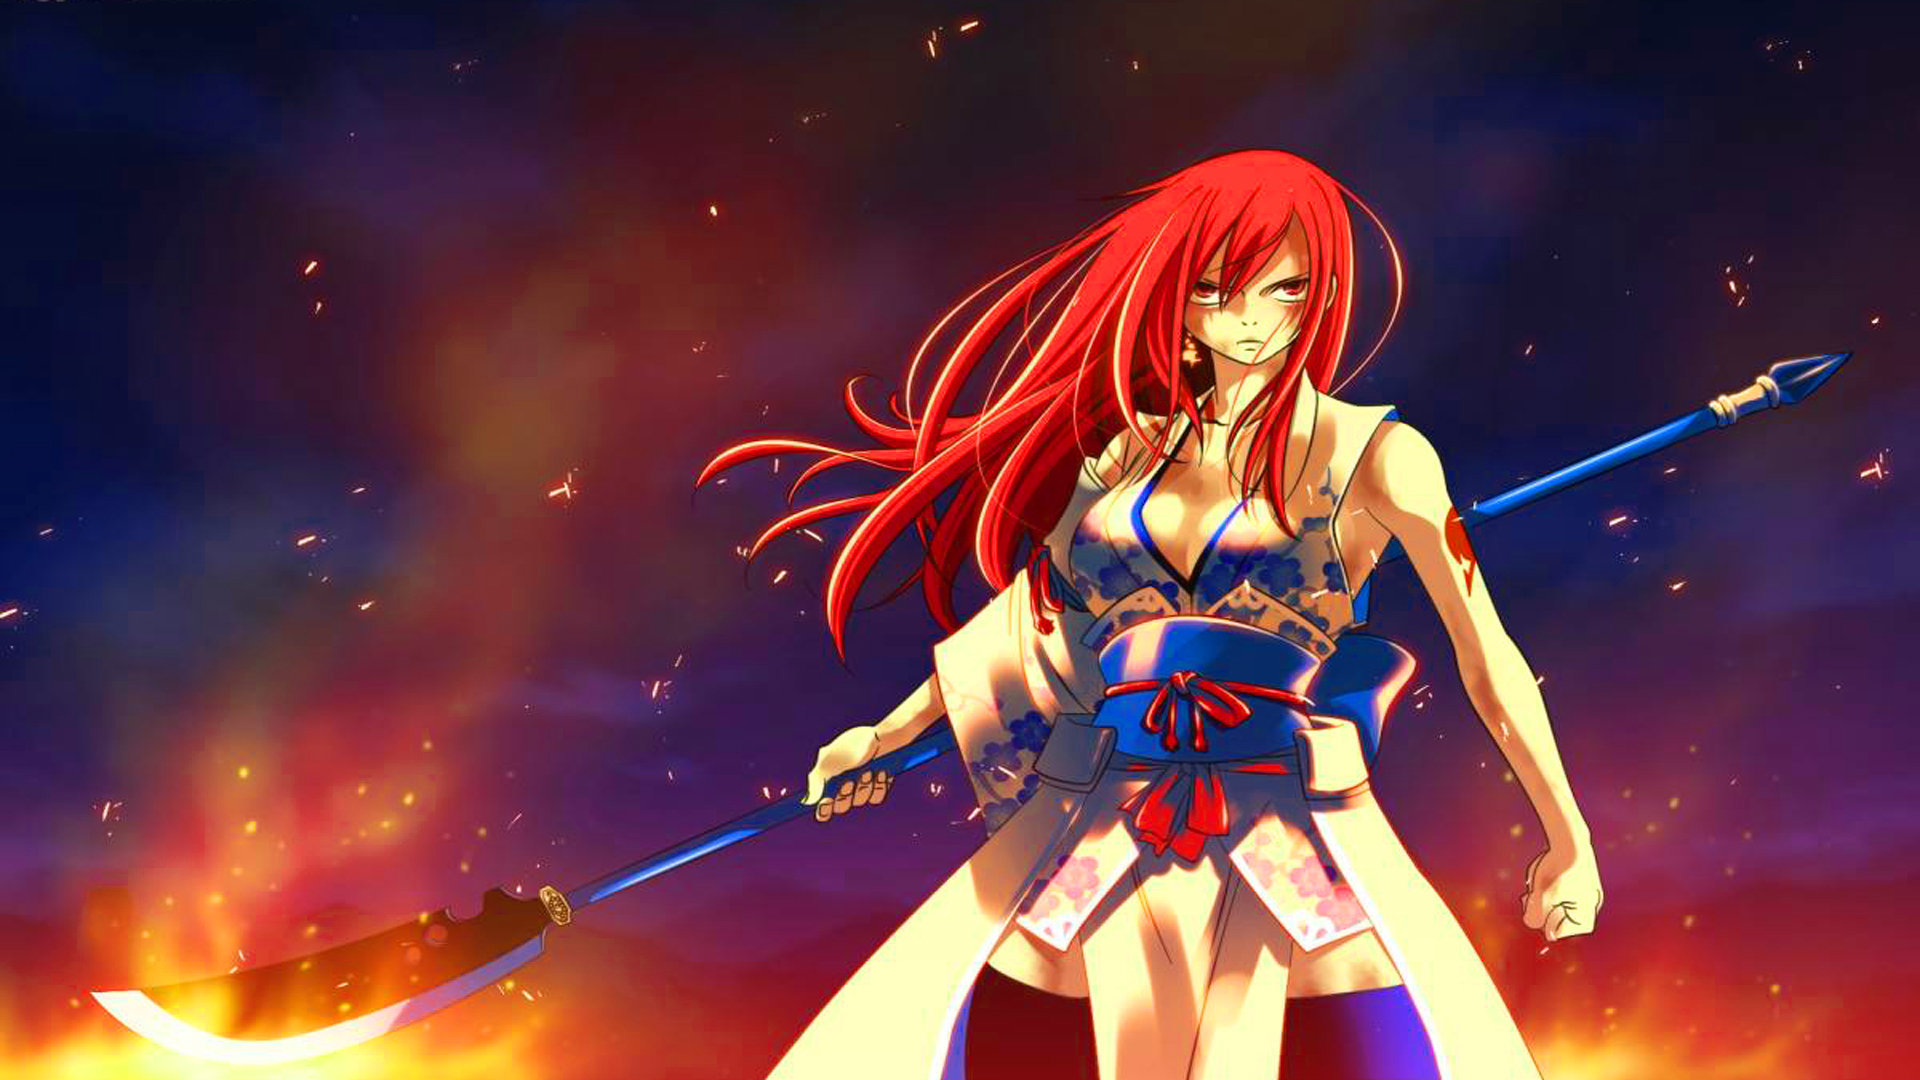 Erza Fairy Tail Wallpaper 19201080 22848 HD Wallpaper Res